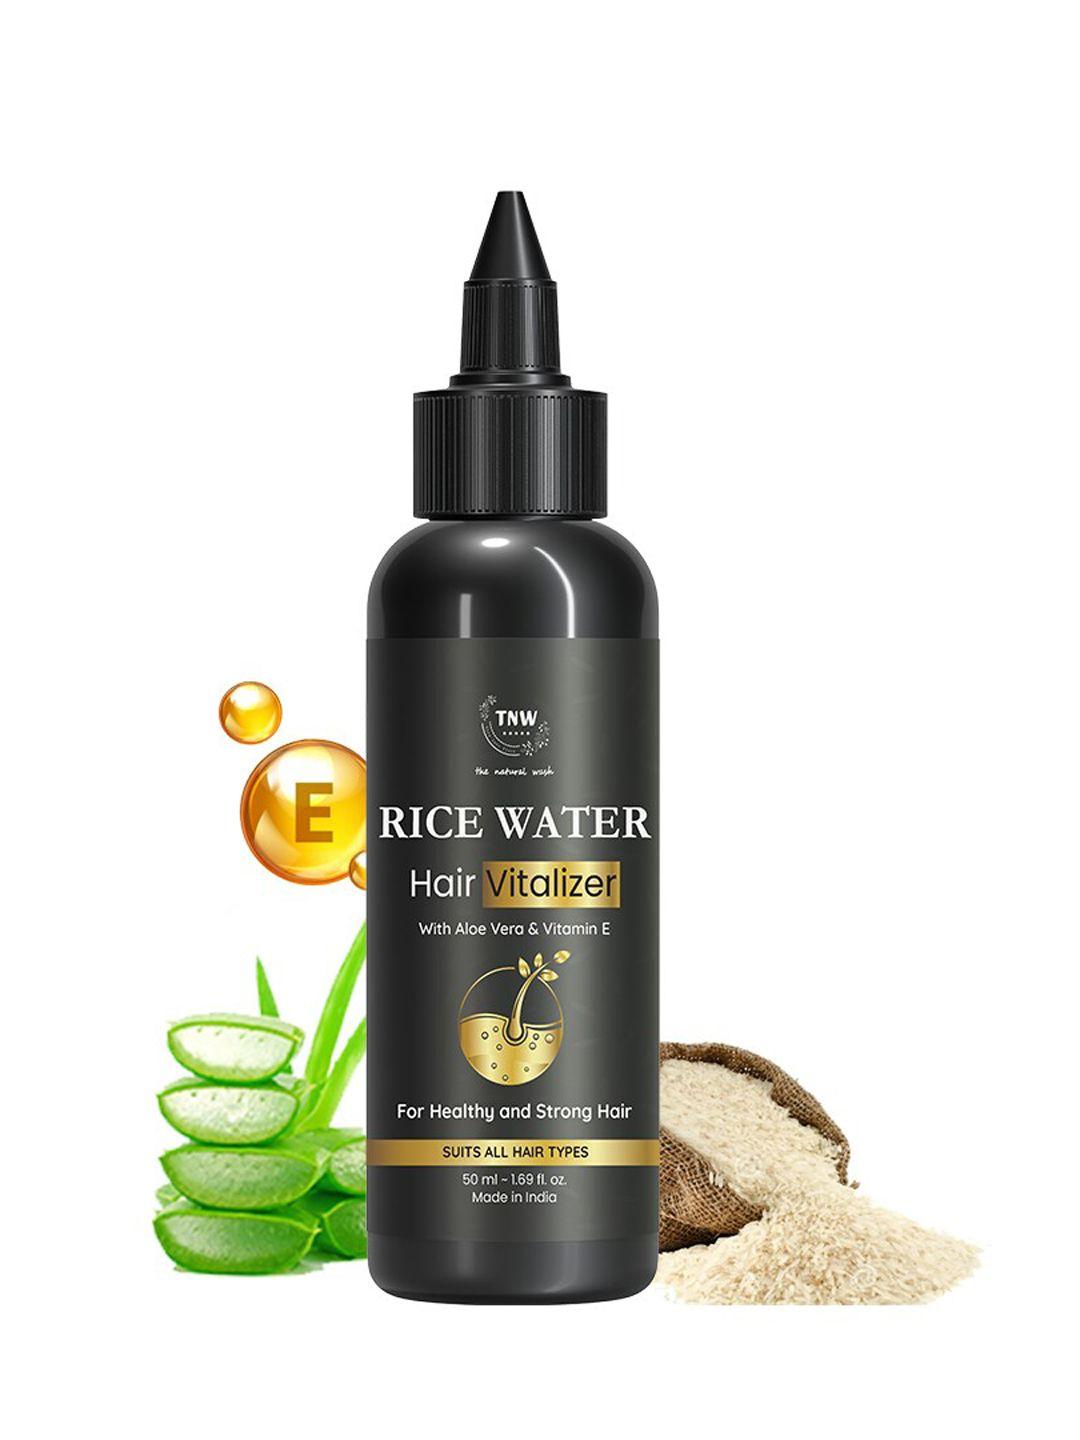 tnw the natural wash rice water hair vitalizer-50ml